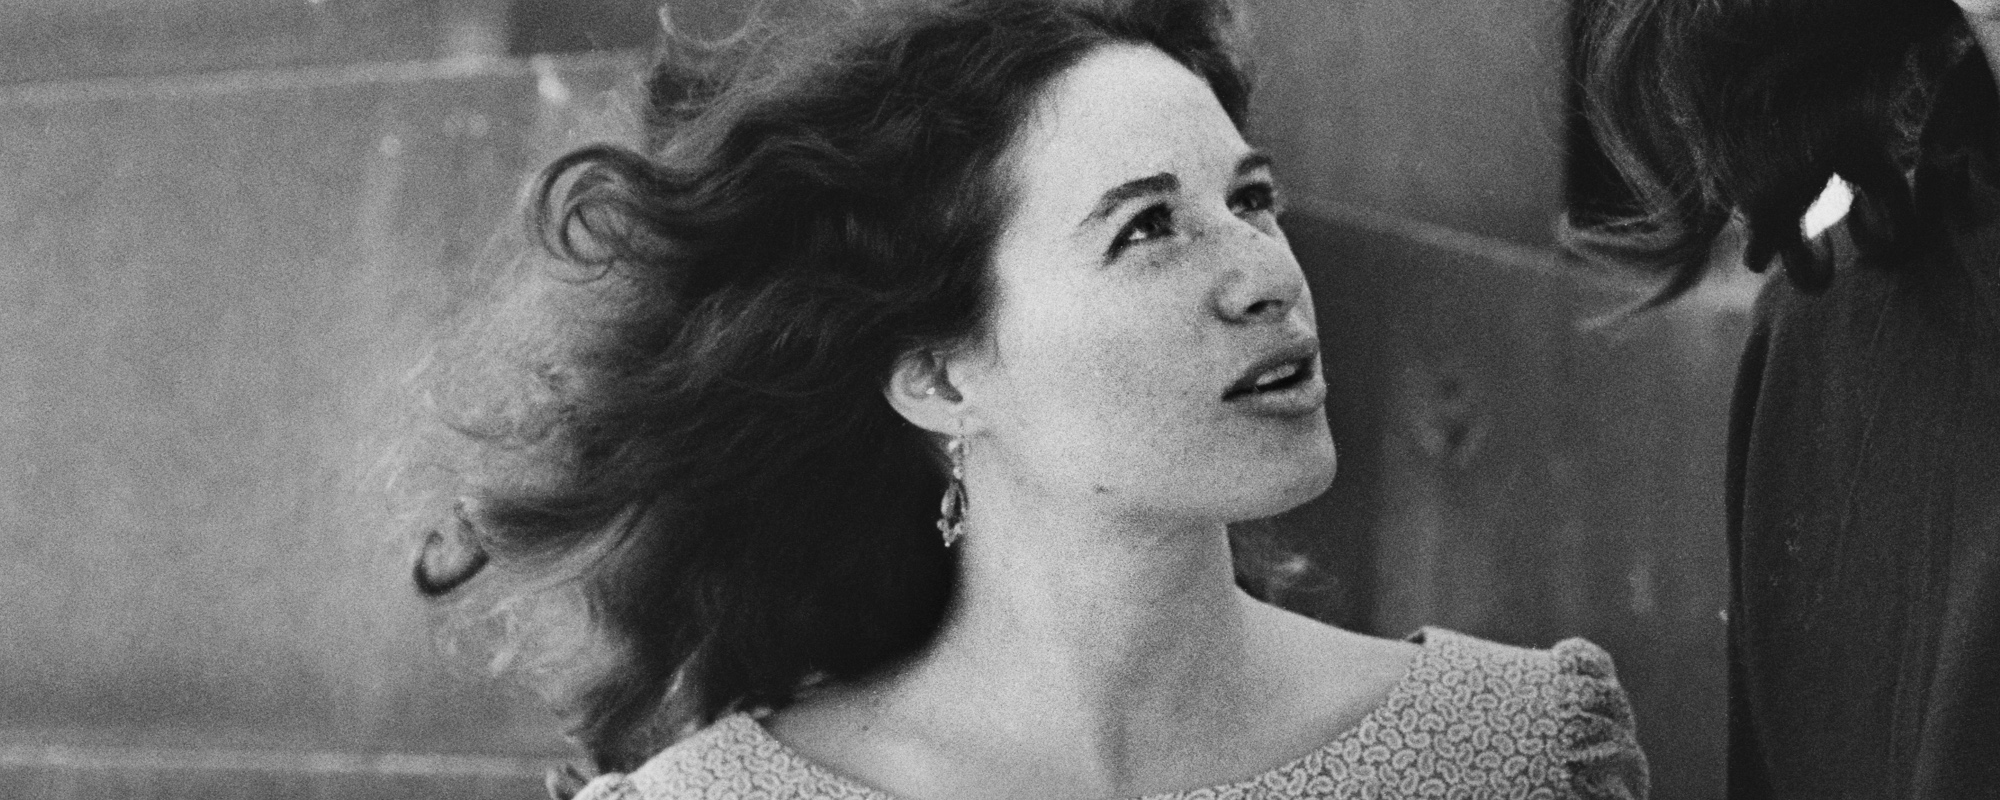 Behind the Song: Gerry Goffin & Carole King, “(You Make Me Feel Like) A Natural Woman”